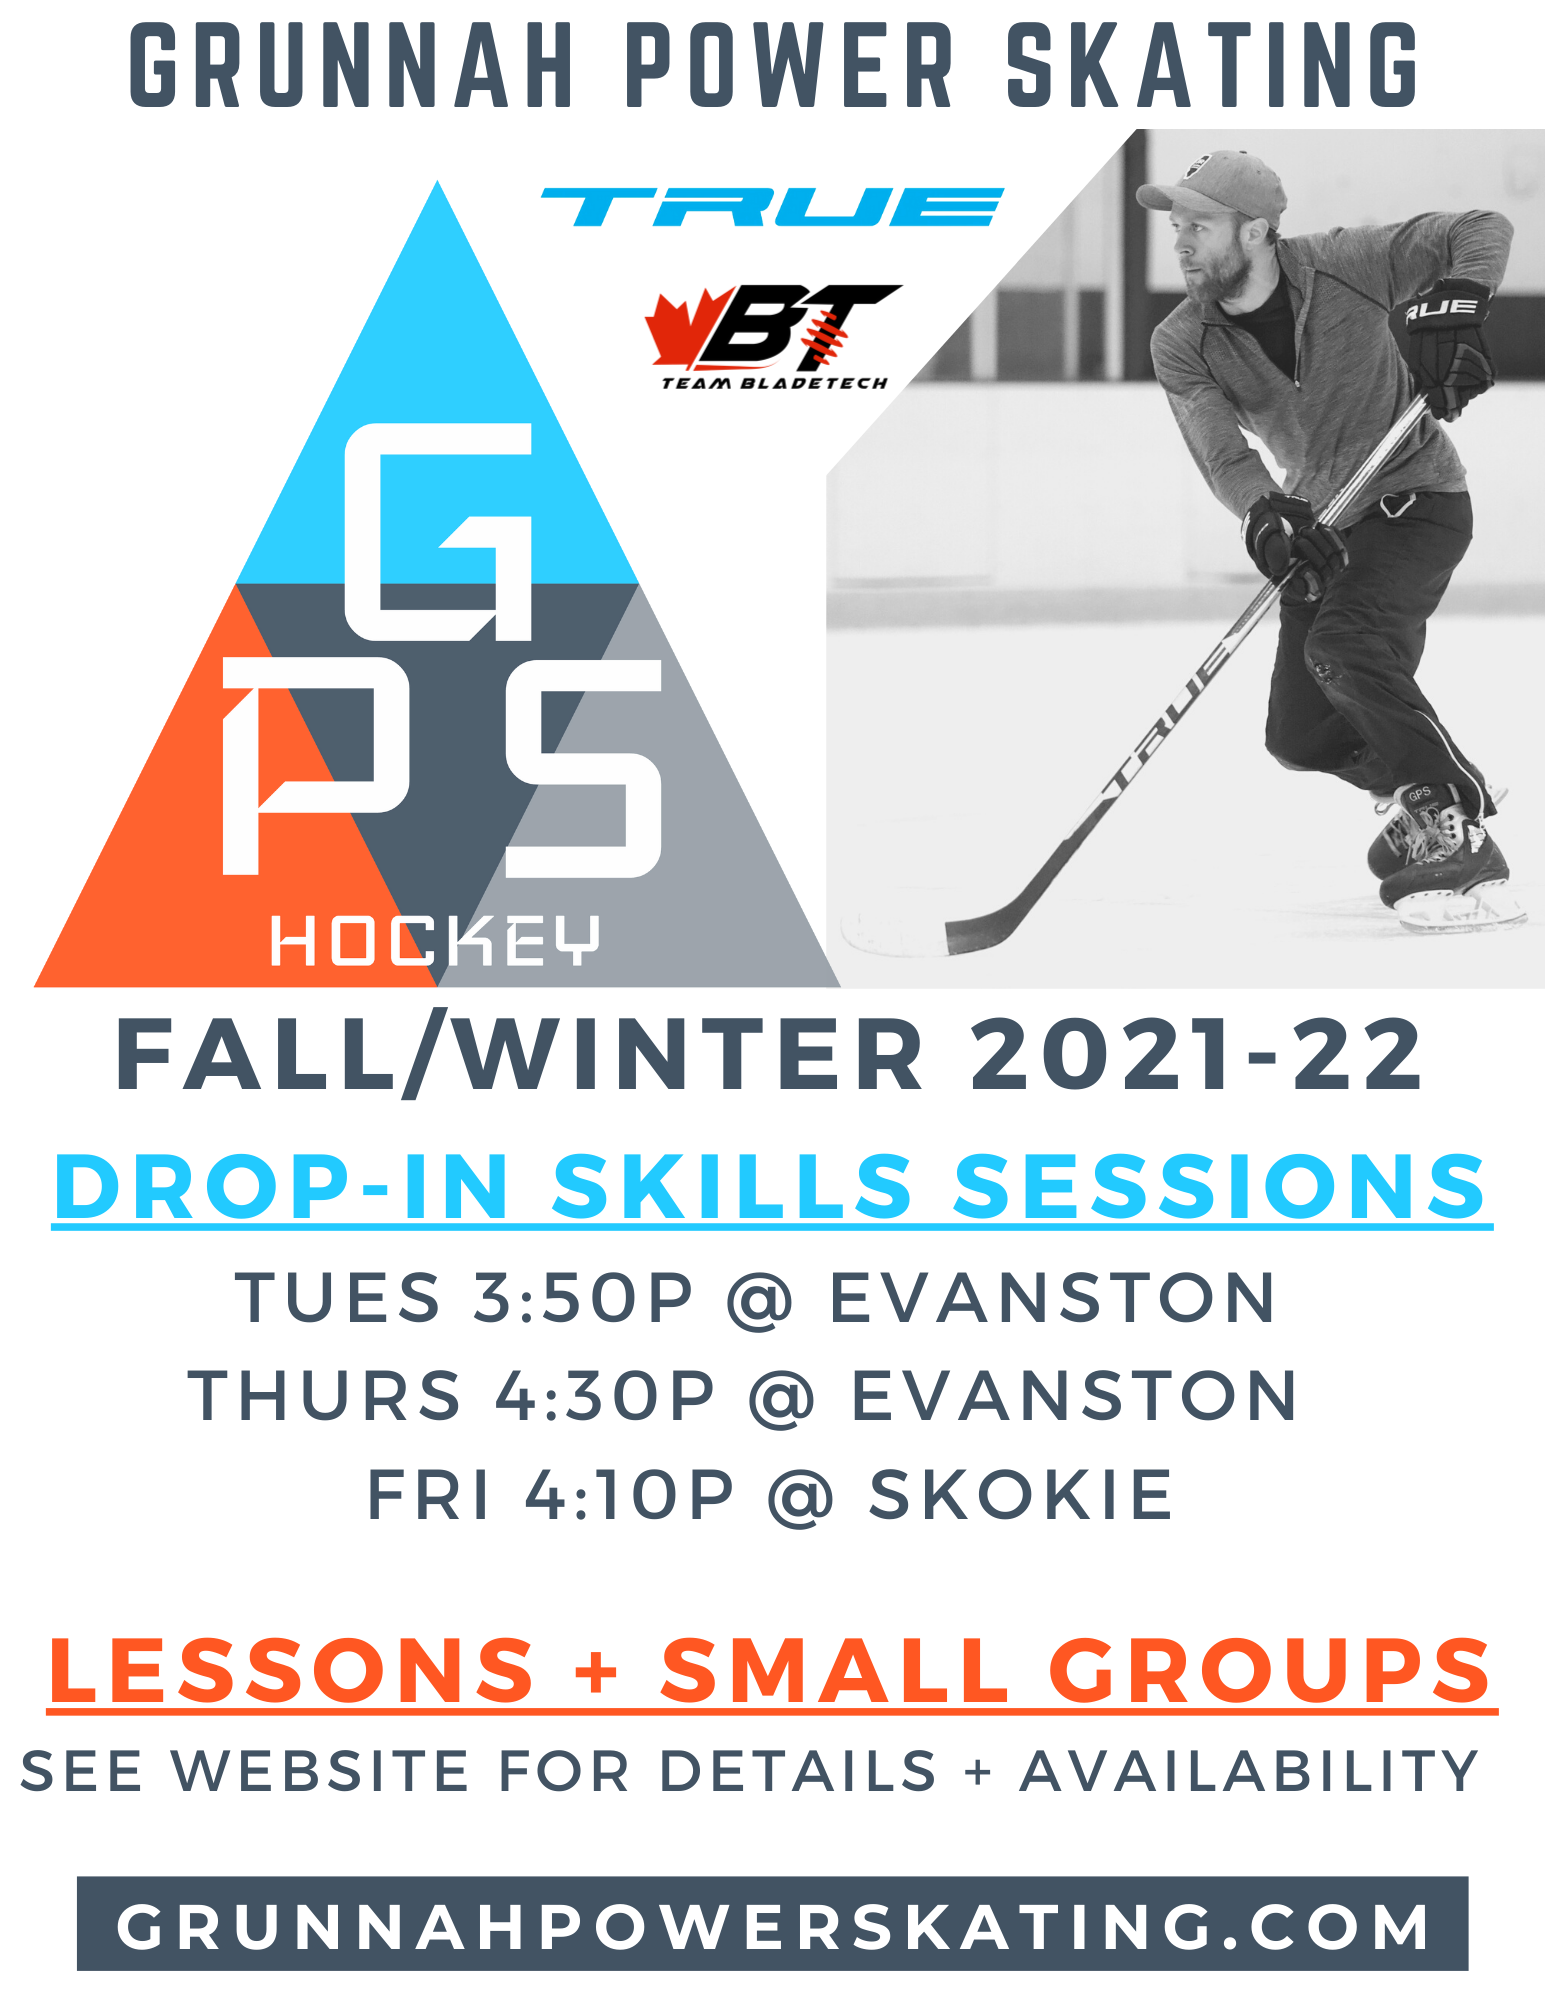 A flyer for Grunnah Power Skating hockey camp in Winter 2021